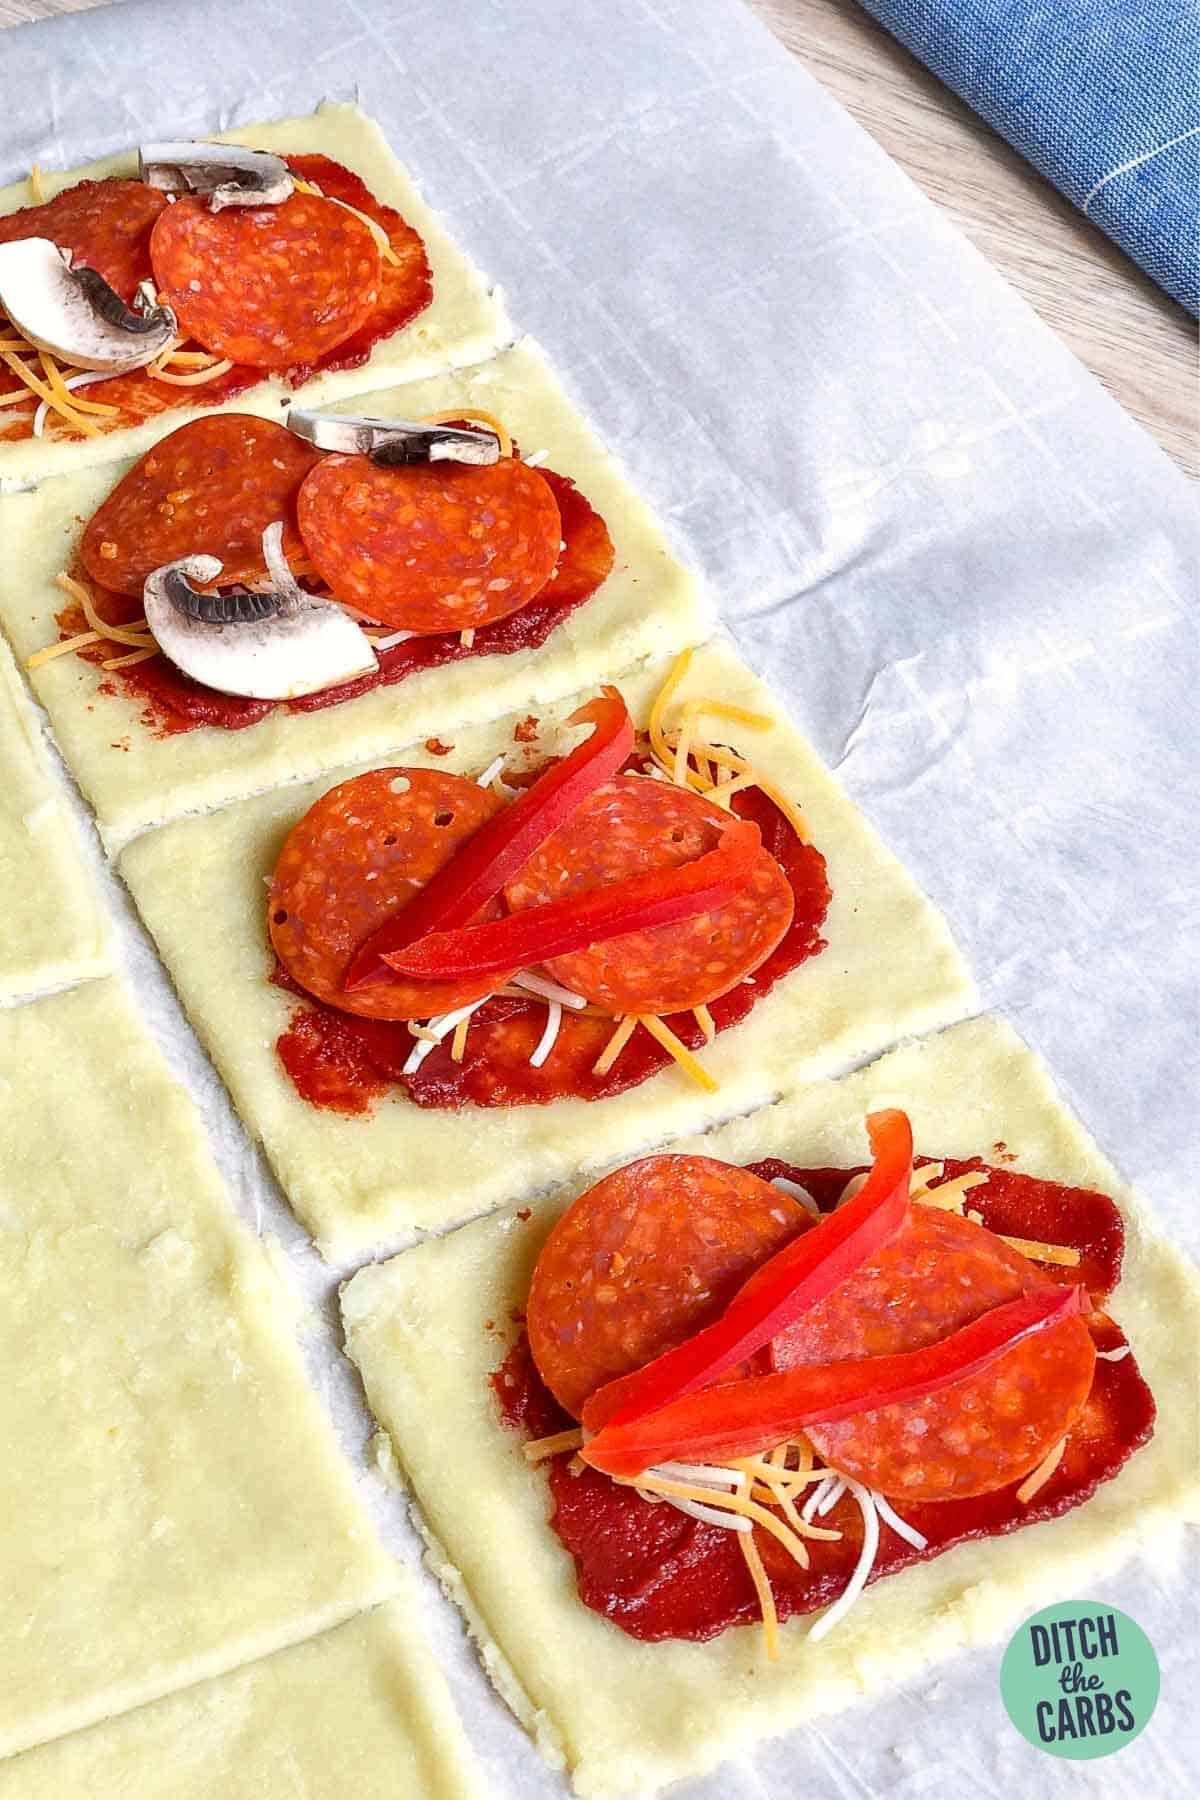 hot pocket pizza pockets with fillings on a baking tray